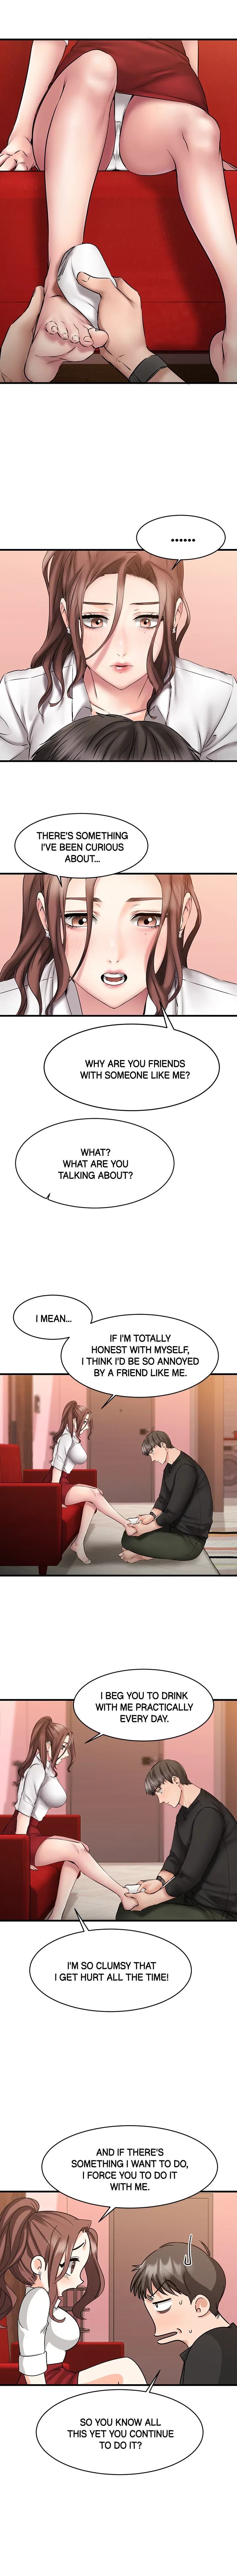 My Female Friend Who Crossed The Line - Chapter 11 Page 10